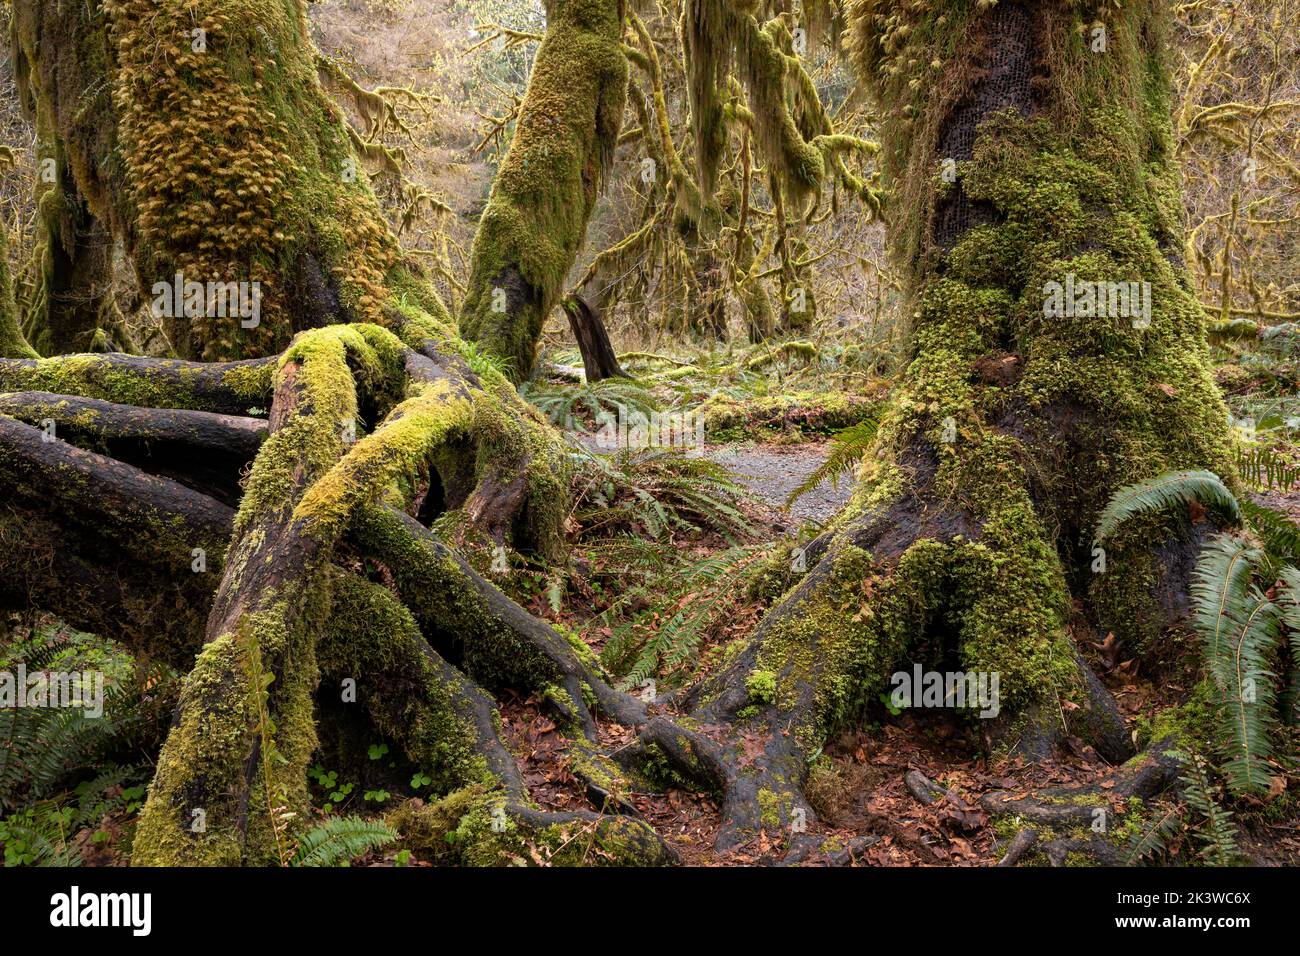 WA22099-00...WASHINGTON - Maple trees covered with moss  in the Hall of Mosses, part of the Hoh Rain Forest , In Olympic National Park. Stock Photo